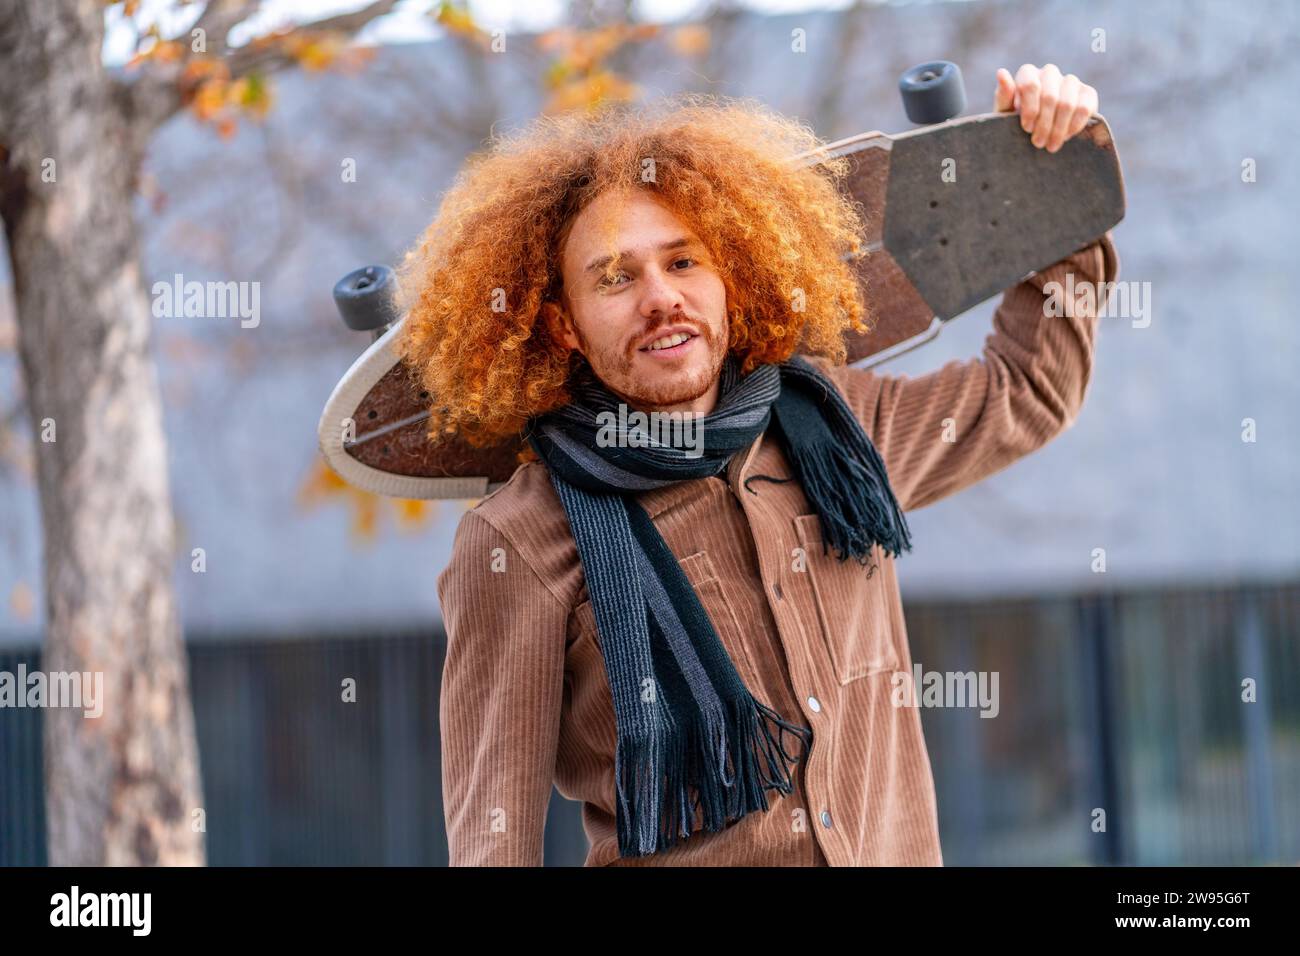 Cool man with curly redhead hair carrying a skateboard in the city Stock Photo